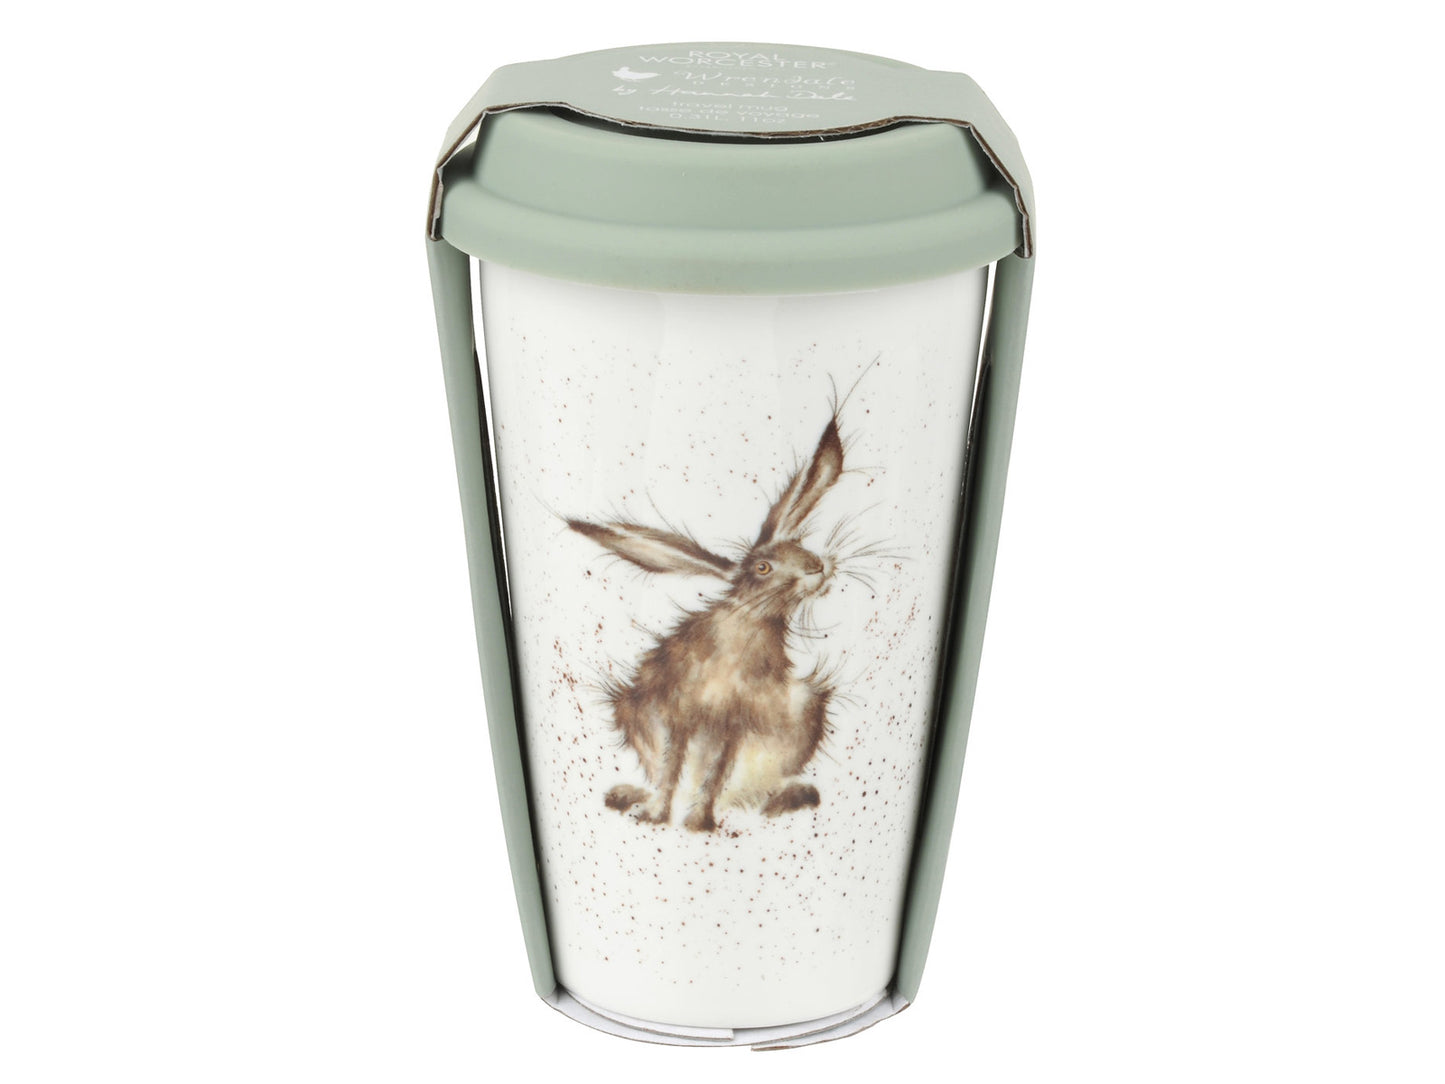 A white porcelain travel mug with a hare design on it and a light green silicone lid